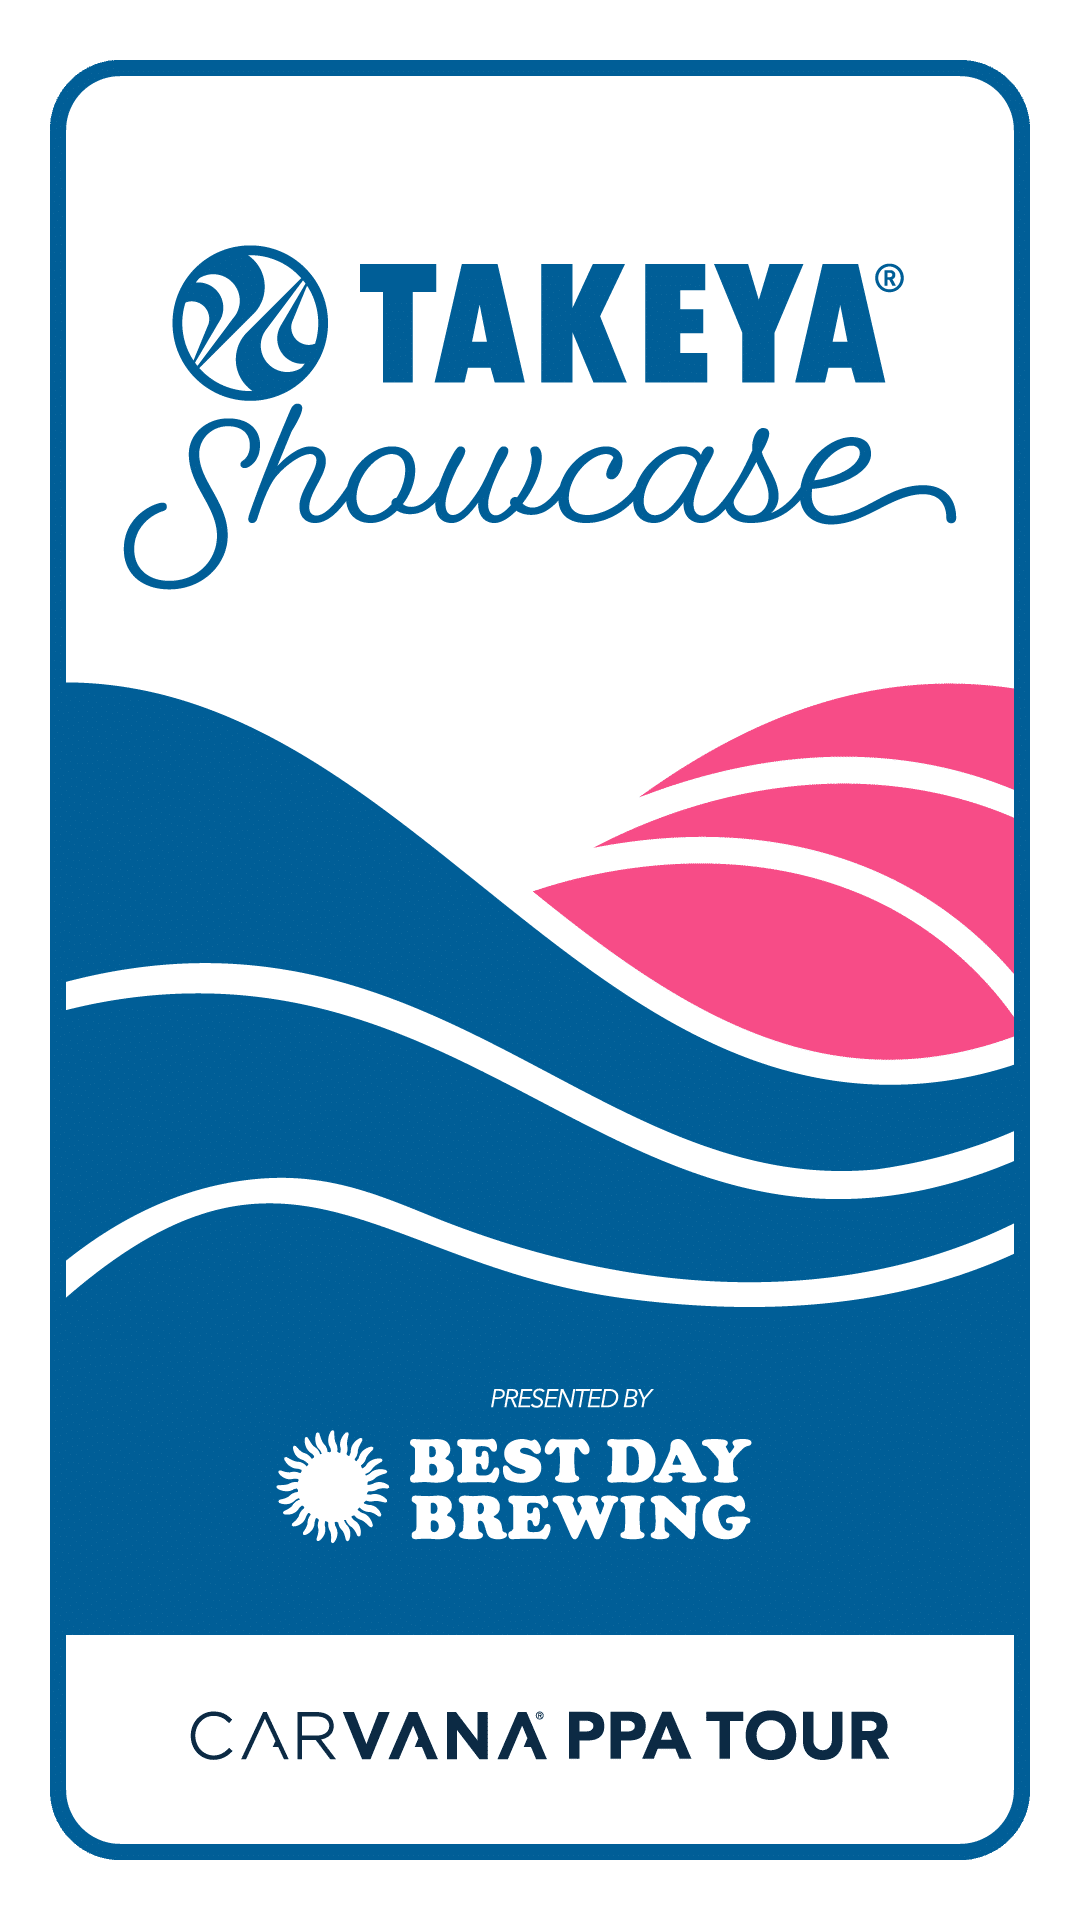 Carvana PPA Tour Takeya Showcase Presented by Best Day Brewing Logo PNG